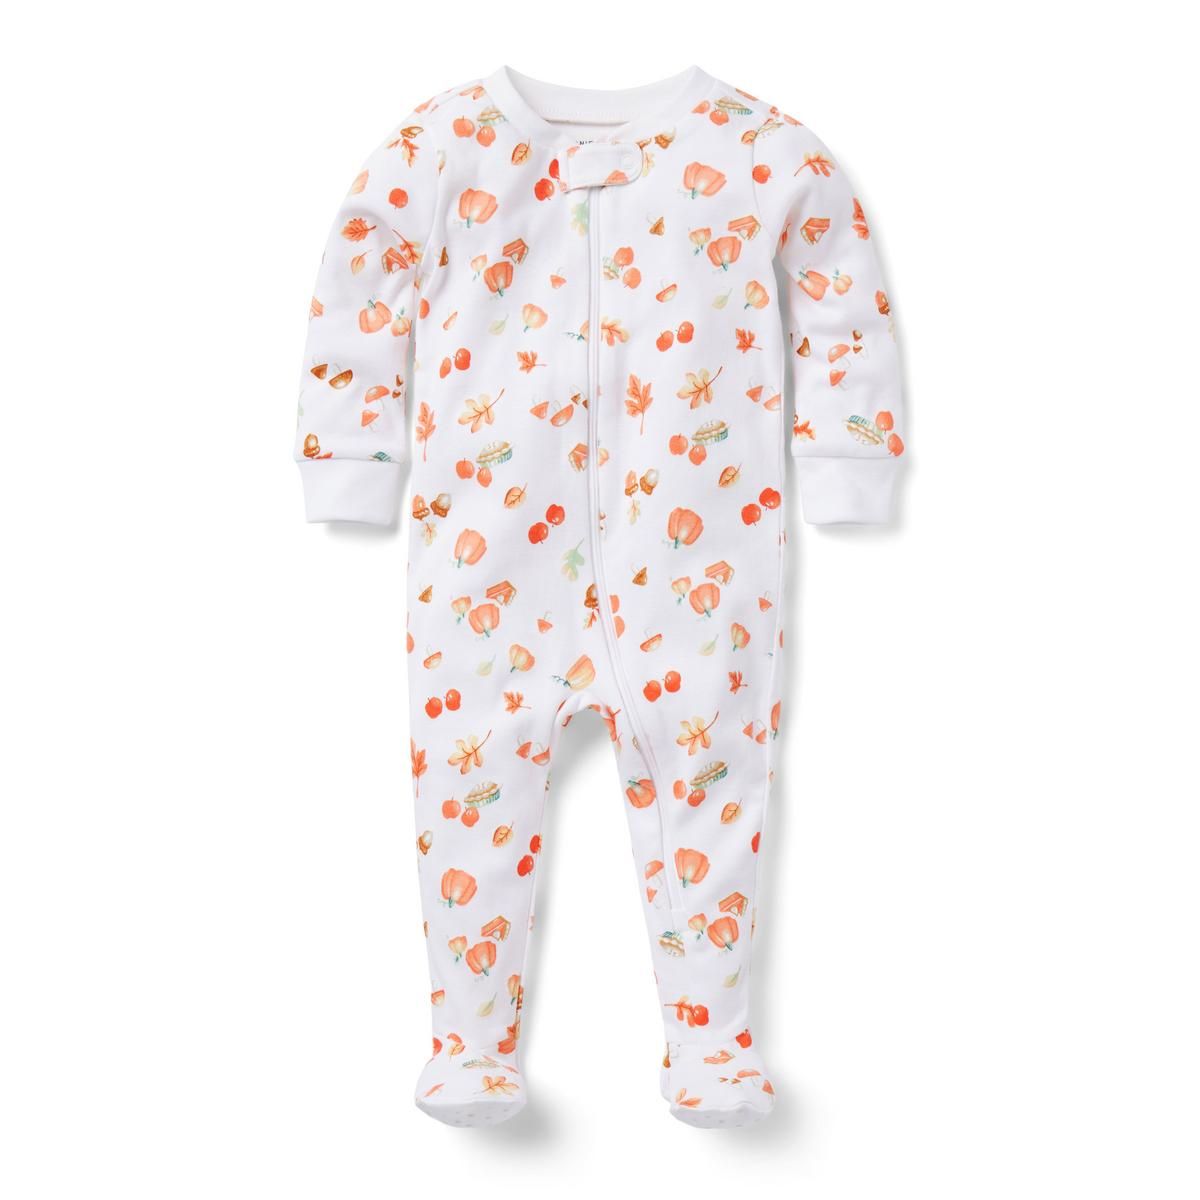 Baby Good Night Footed Pajamas In Fall Favorites | Janie and Jack